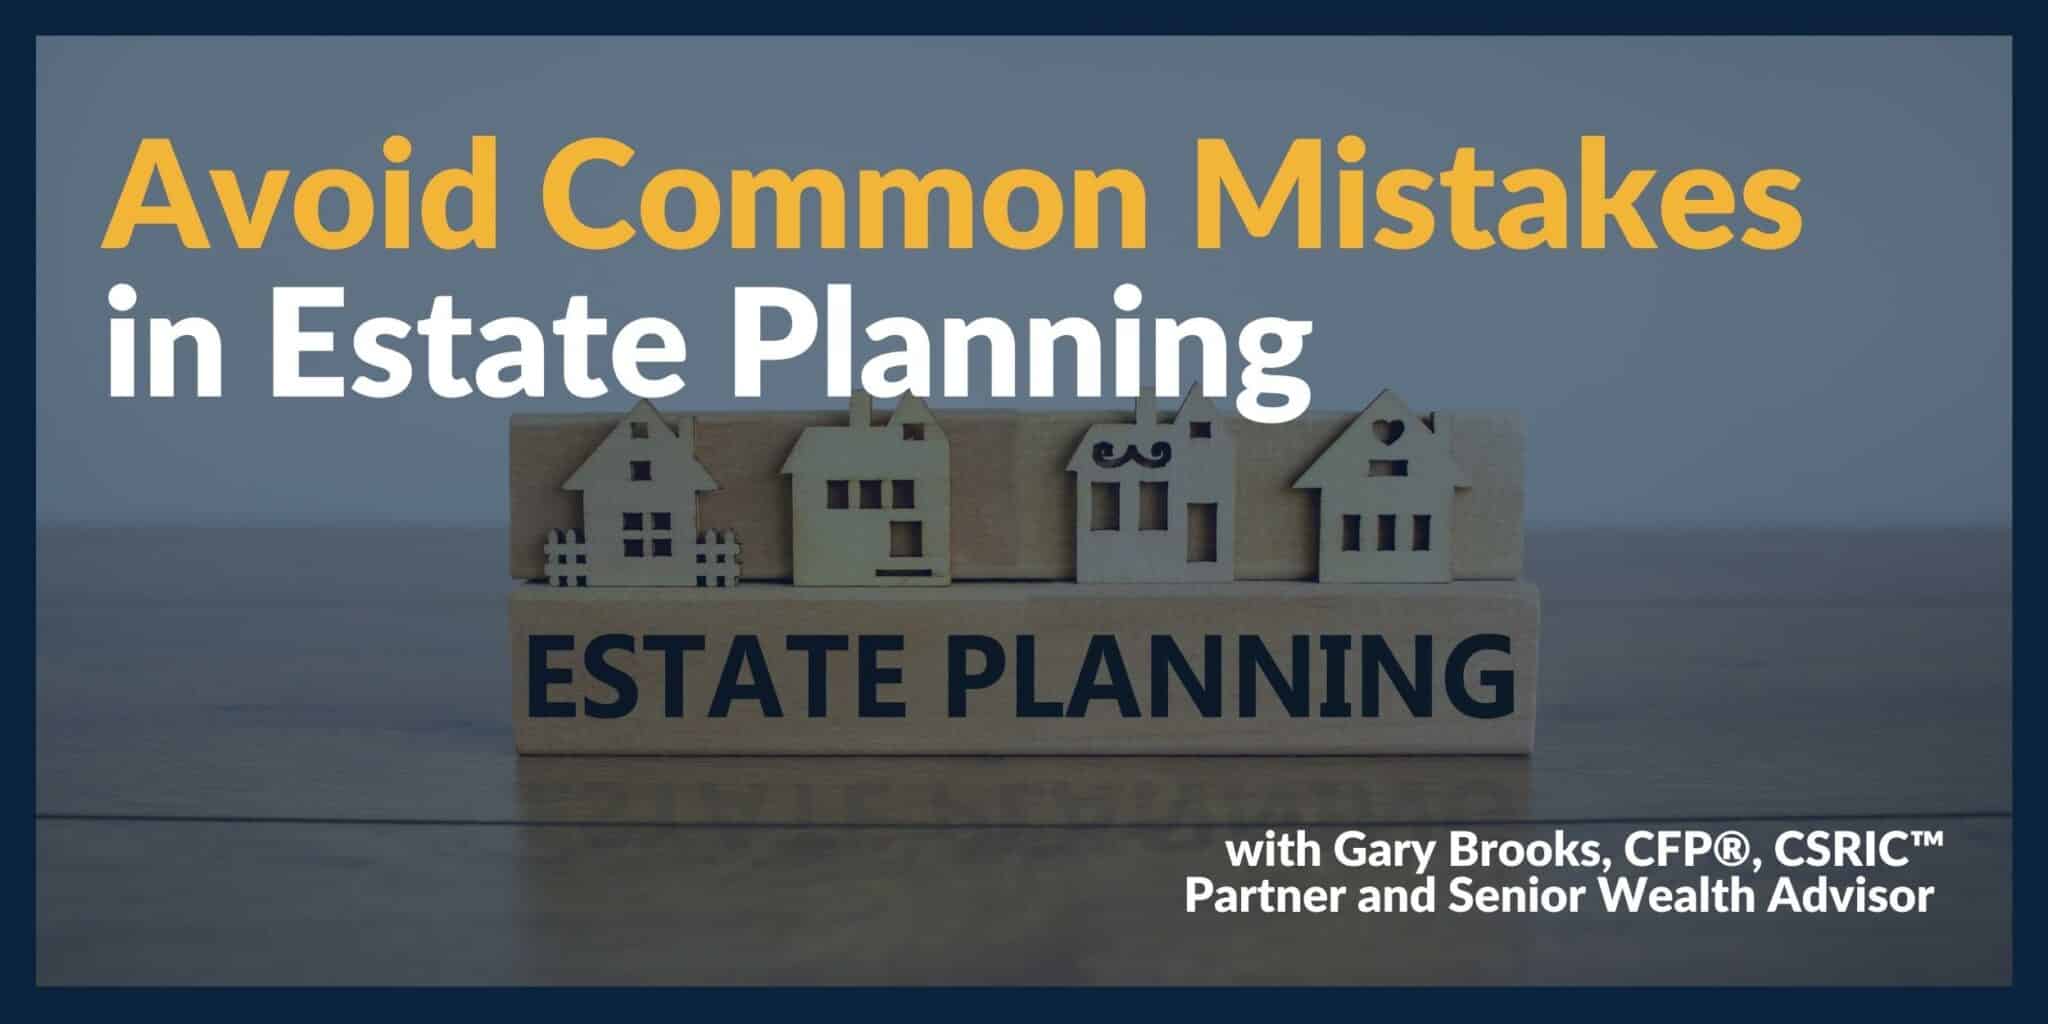 Don’t Wait Until the Literal Last Minute to Plan Your Estate